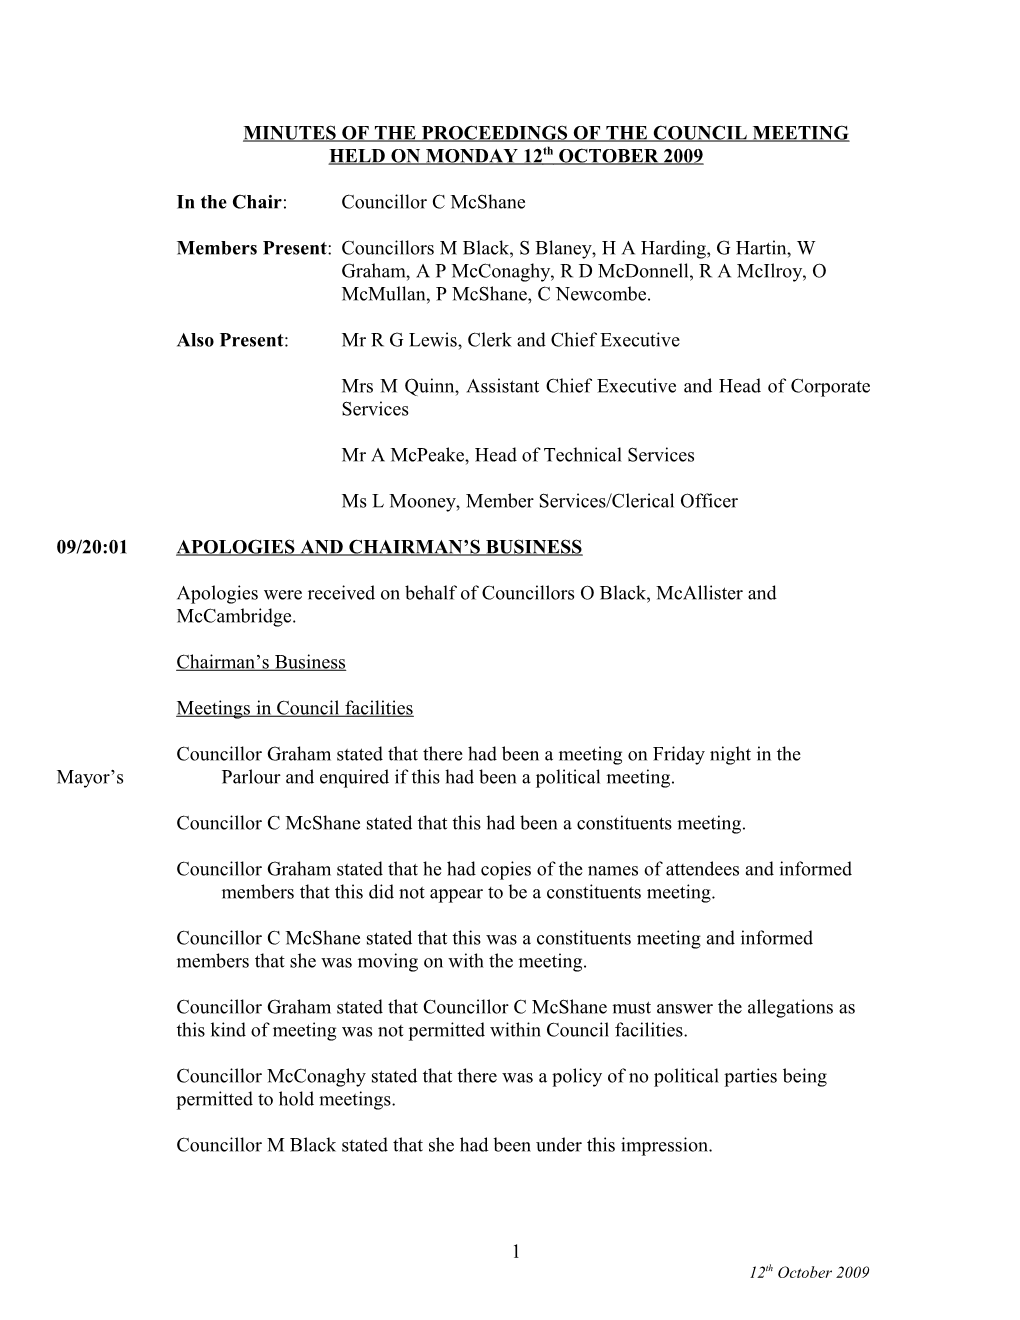 Minutes of the Proceedings of the Council Meeting Held s7